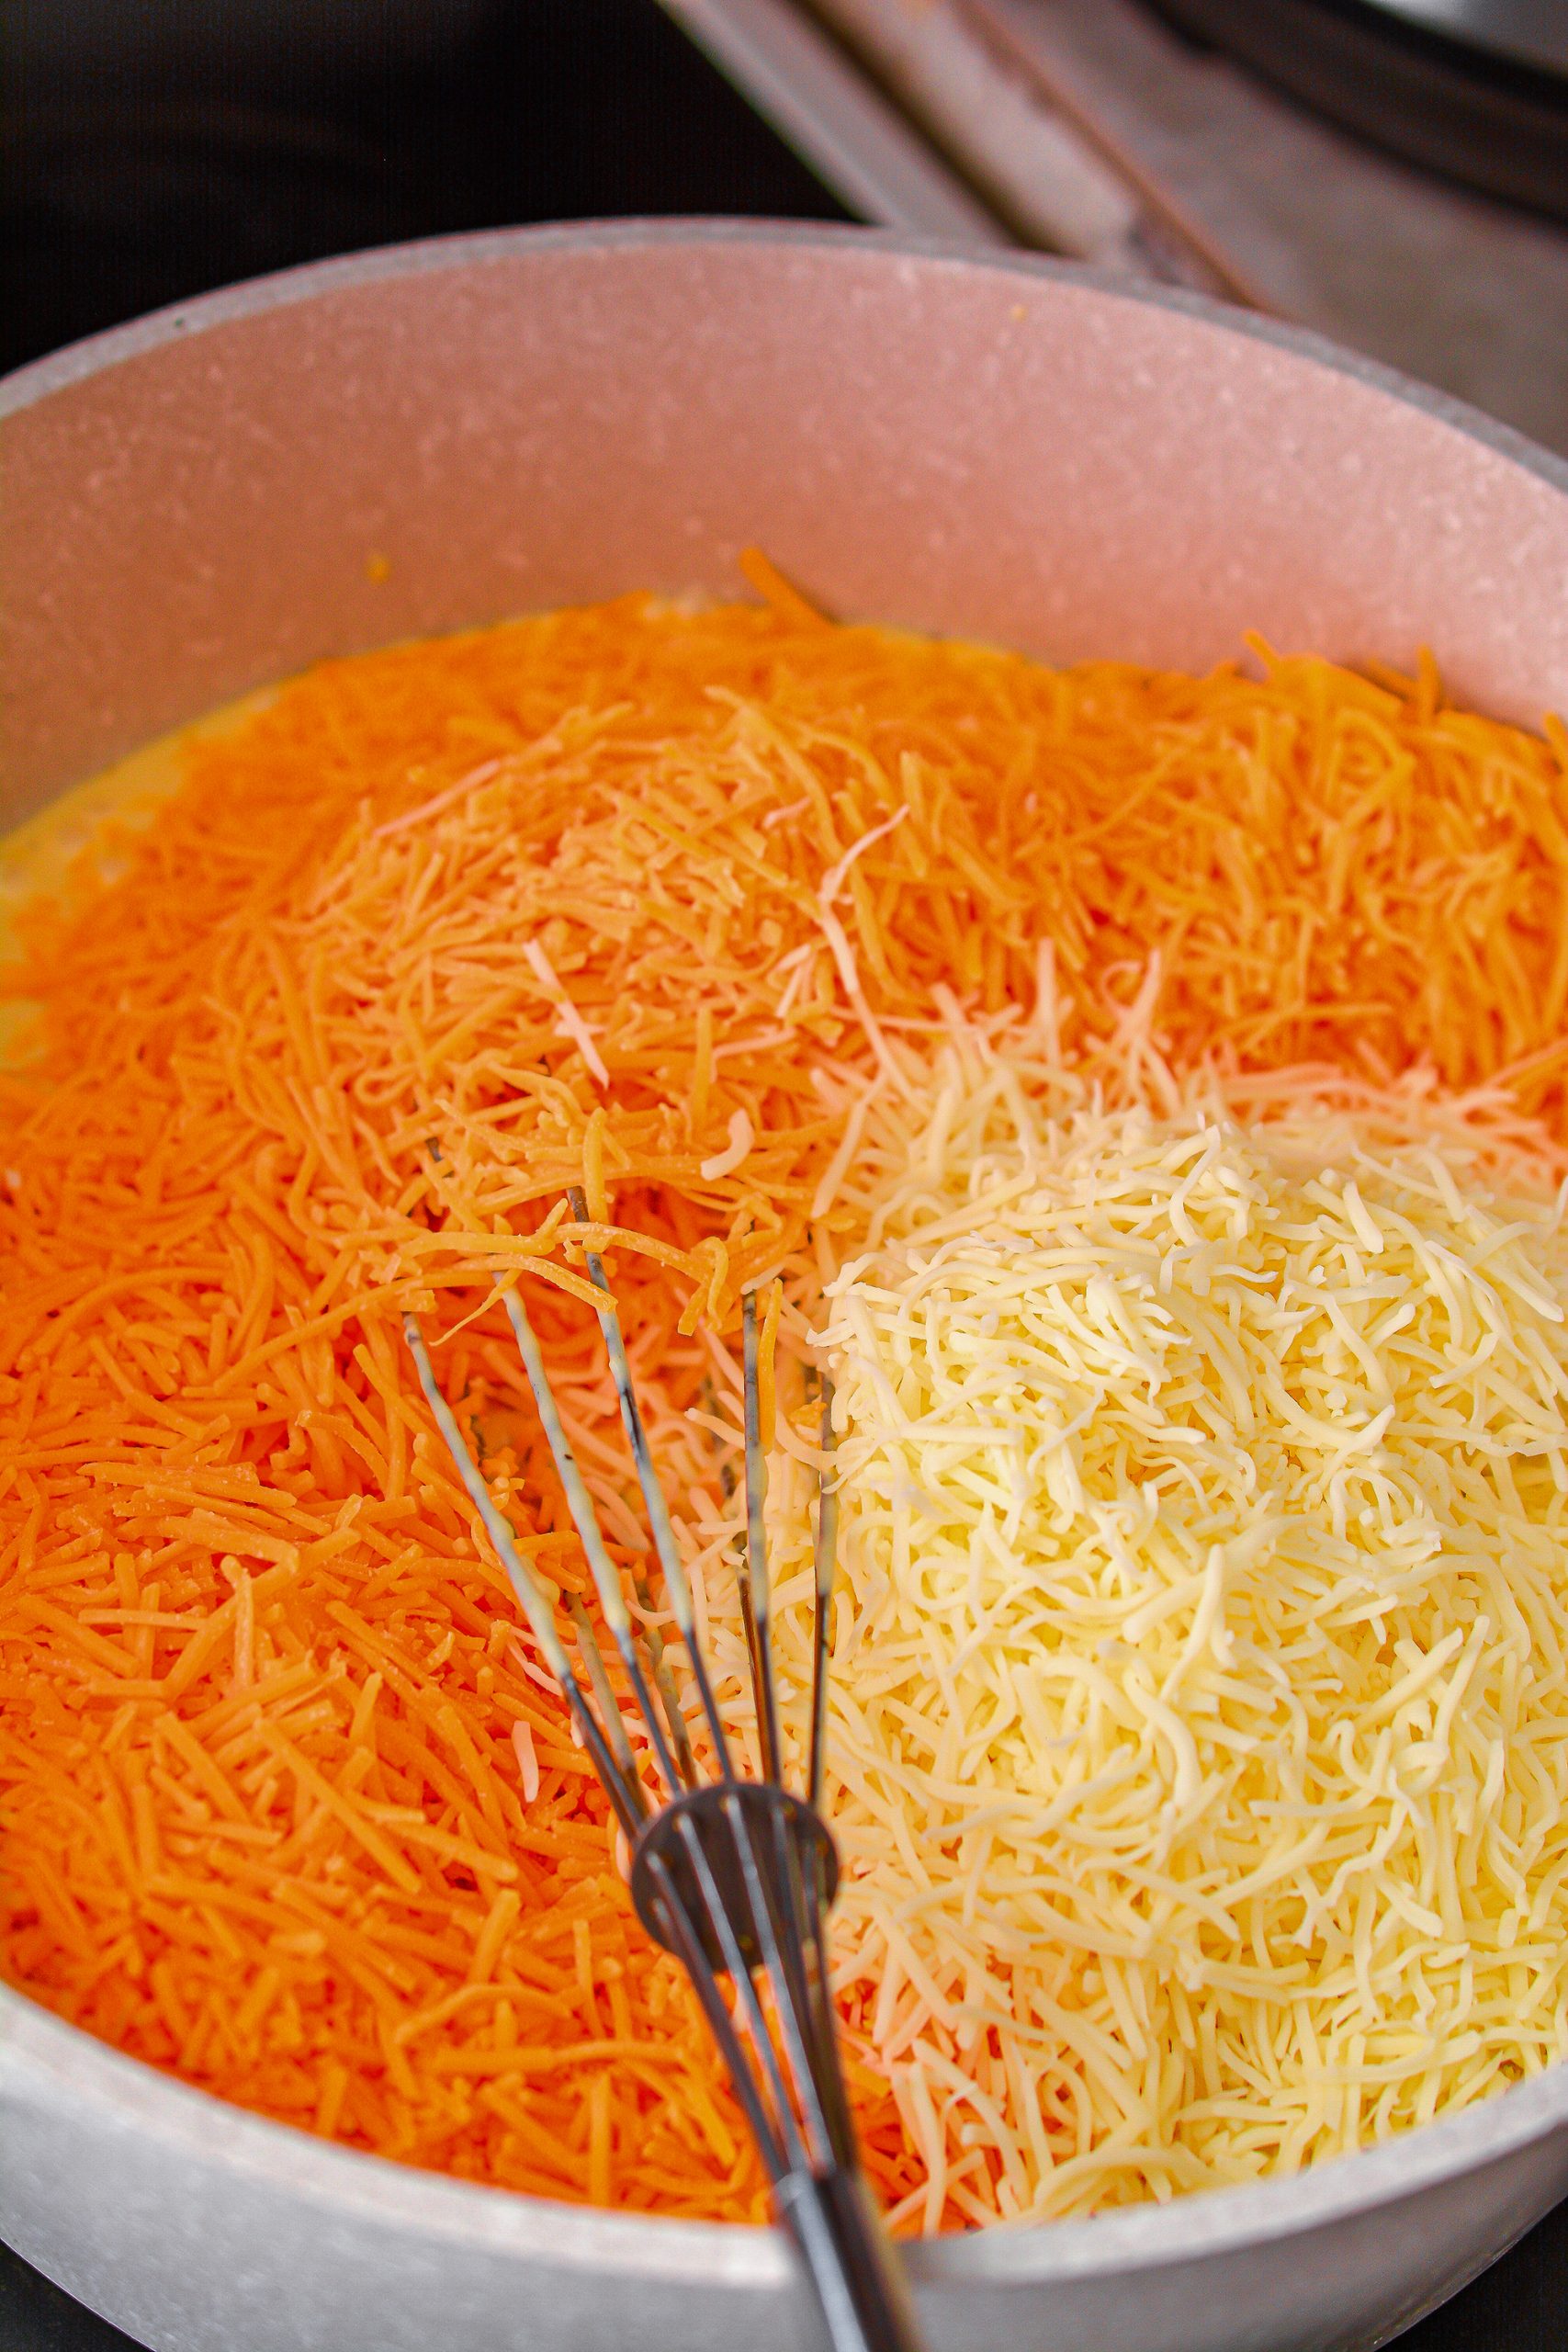 Place the shredded cheeses into the saucepan, and stir to combine until the cheeses have completely melted.